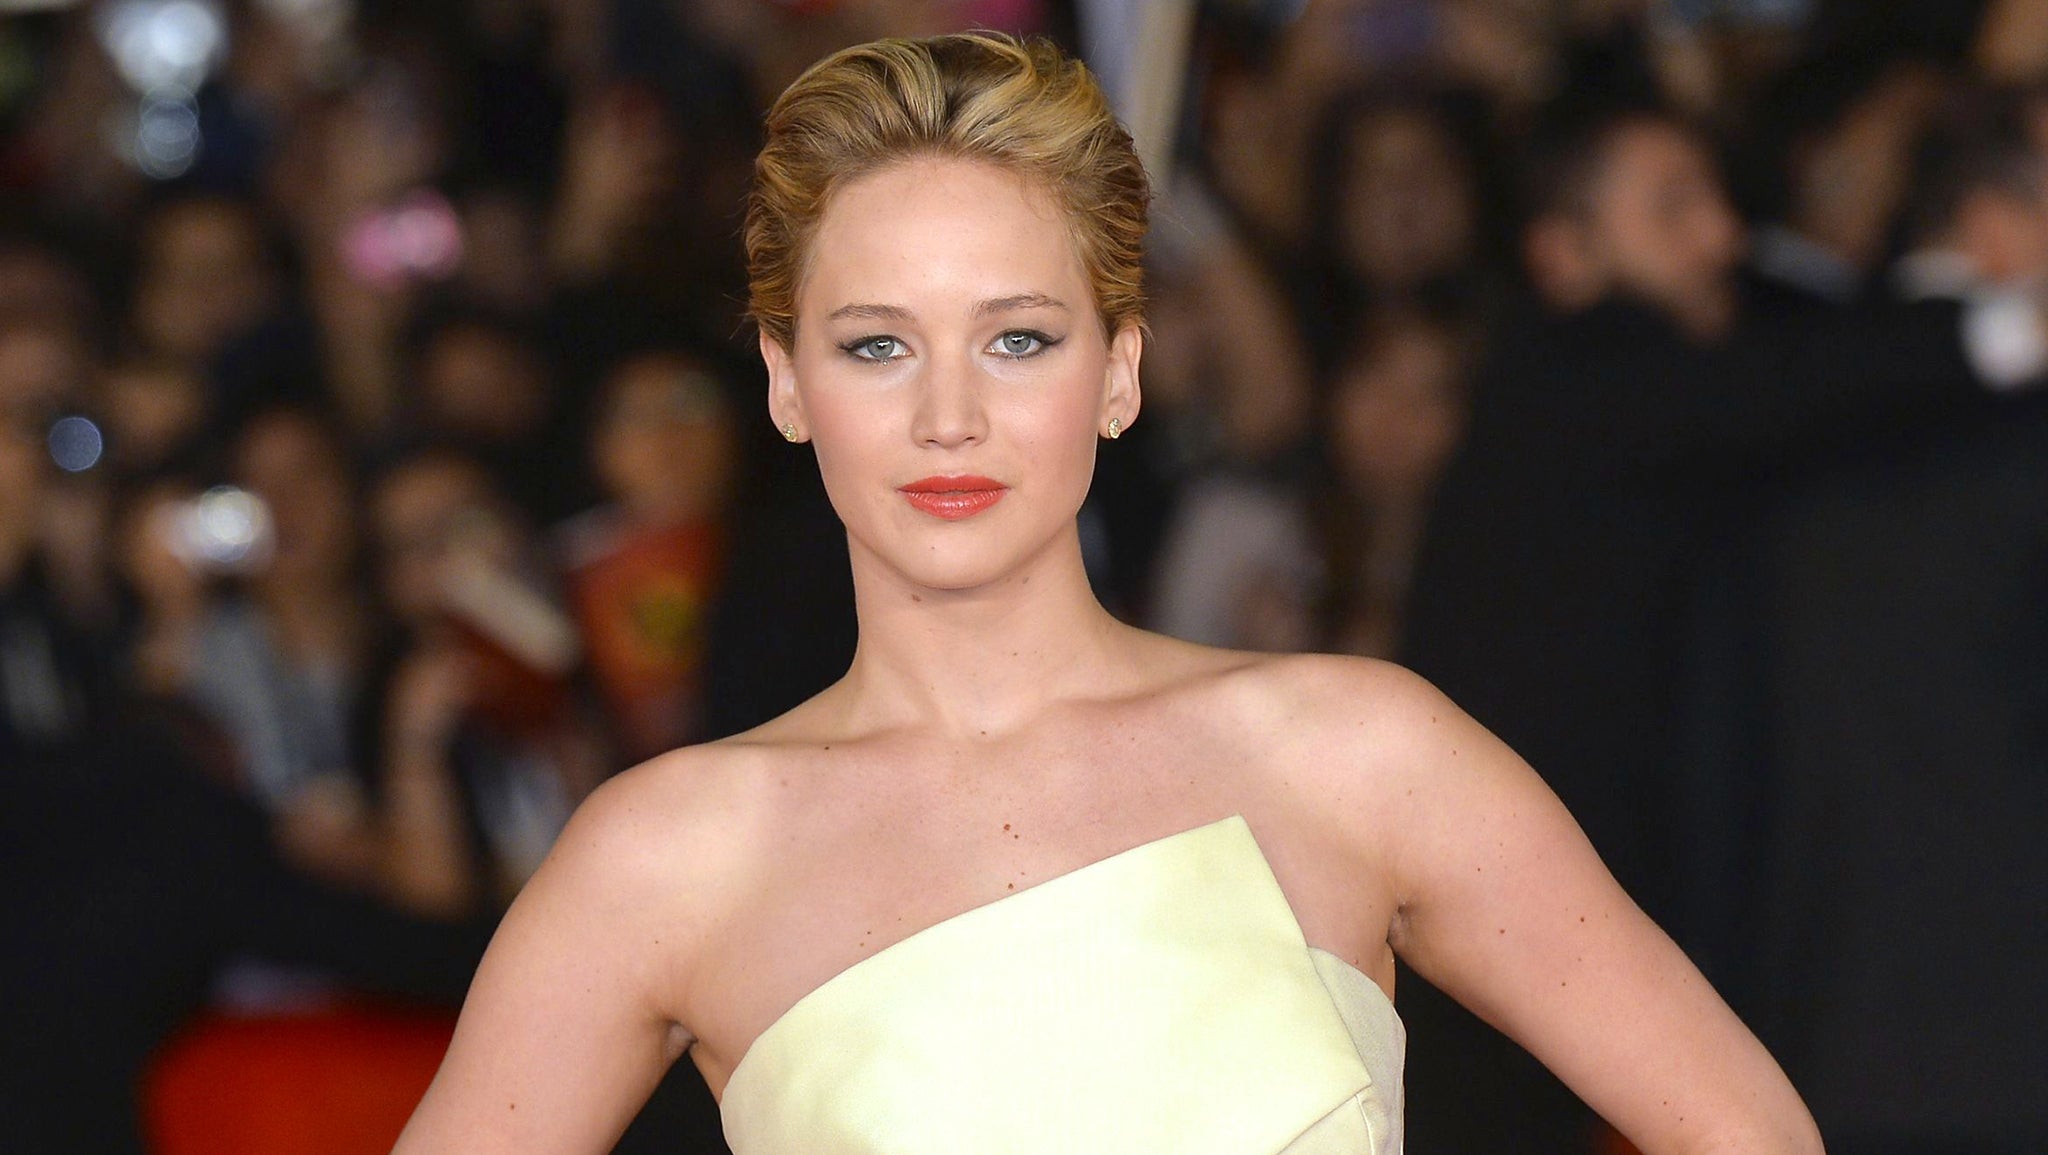 Naked pictures of Jennifer Lawrence and other stars leak 